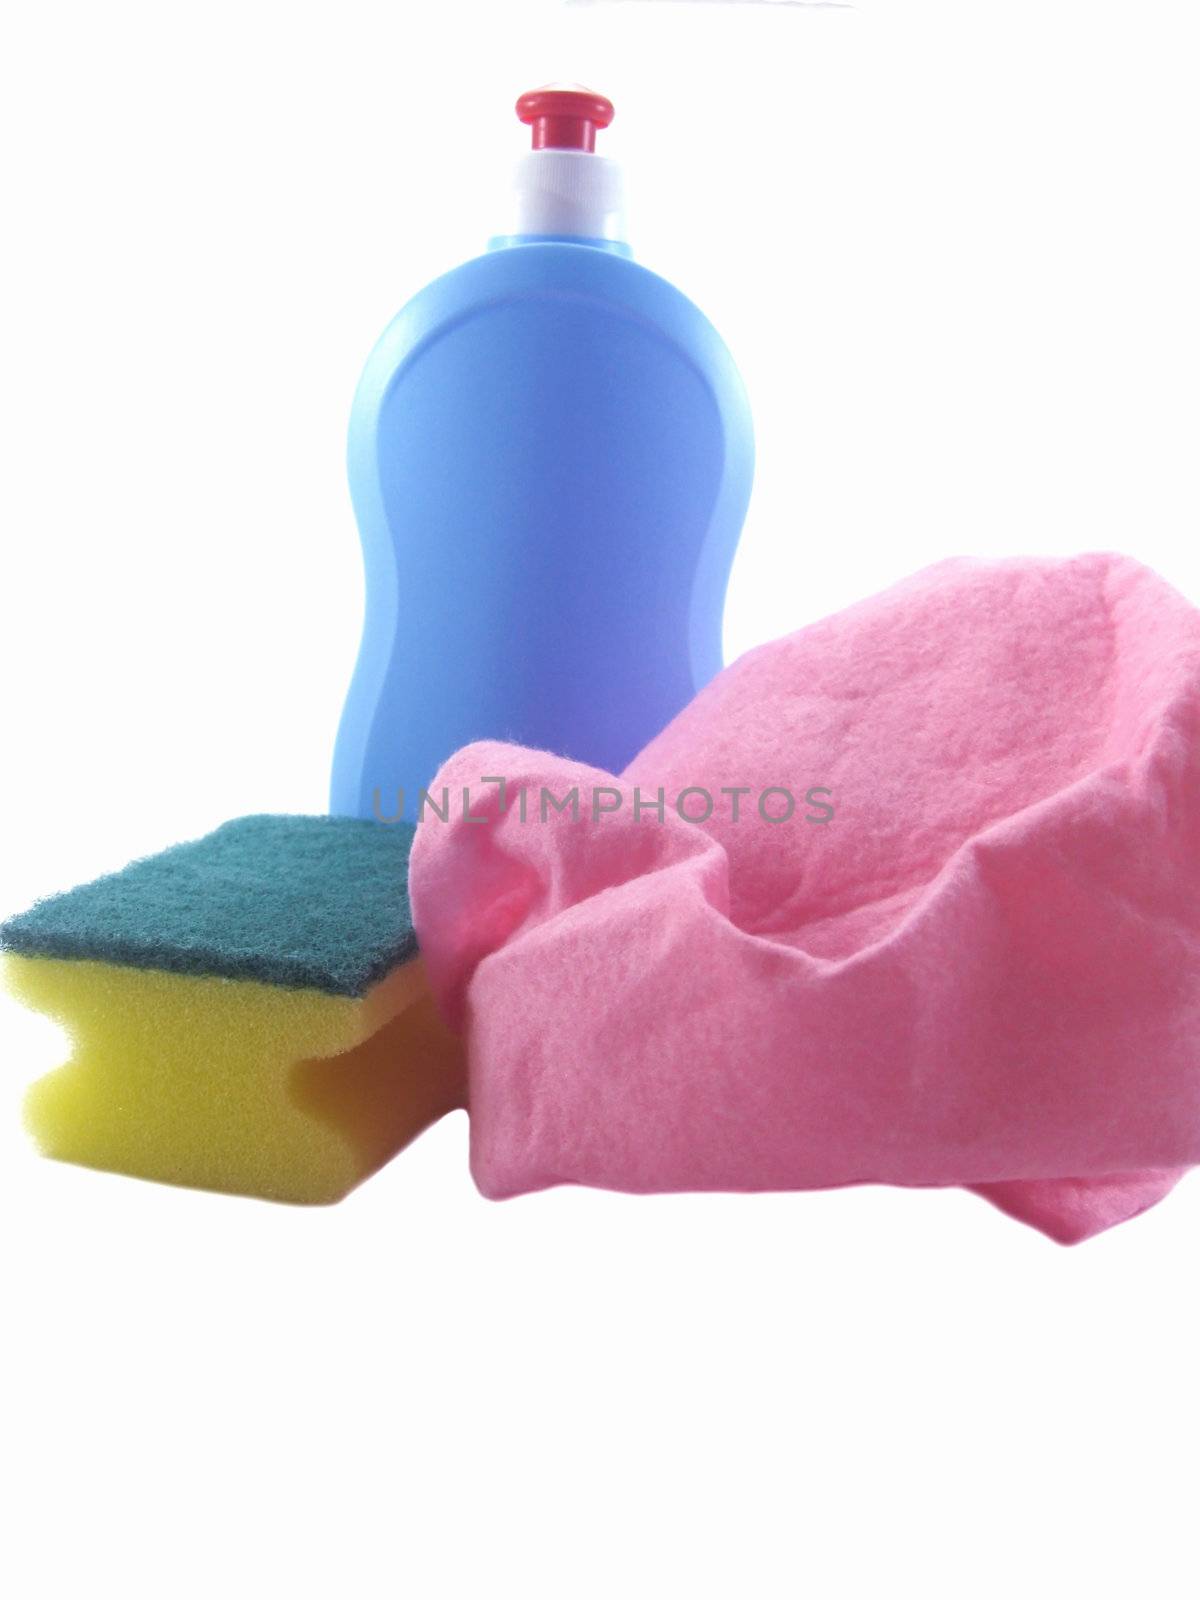 Includes means for ware washing, a sponge, a napkin